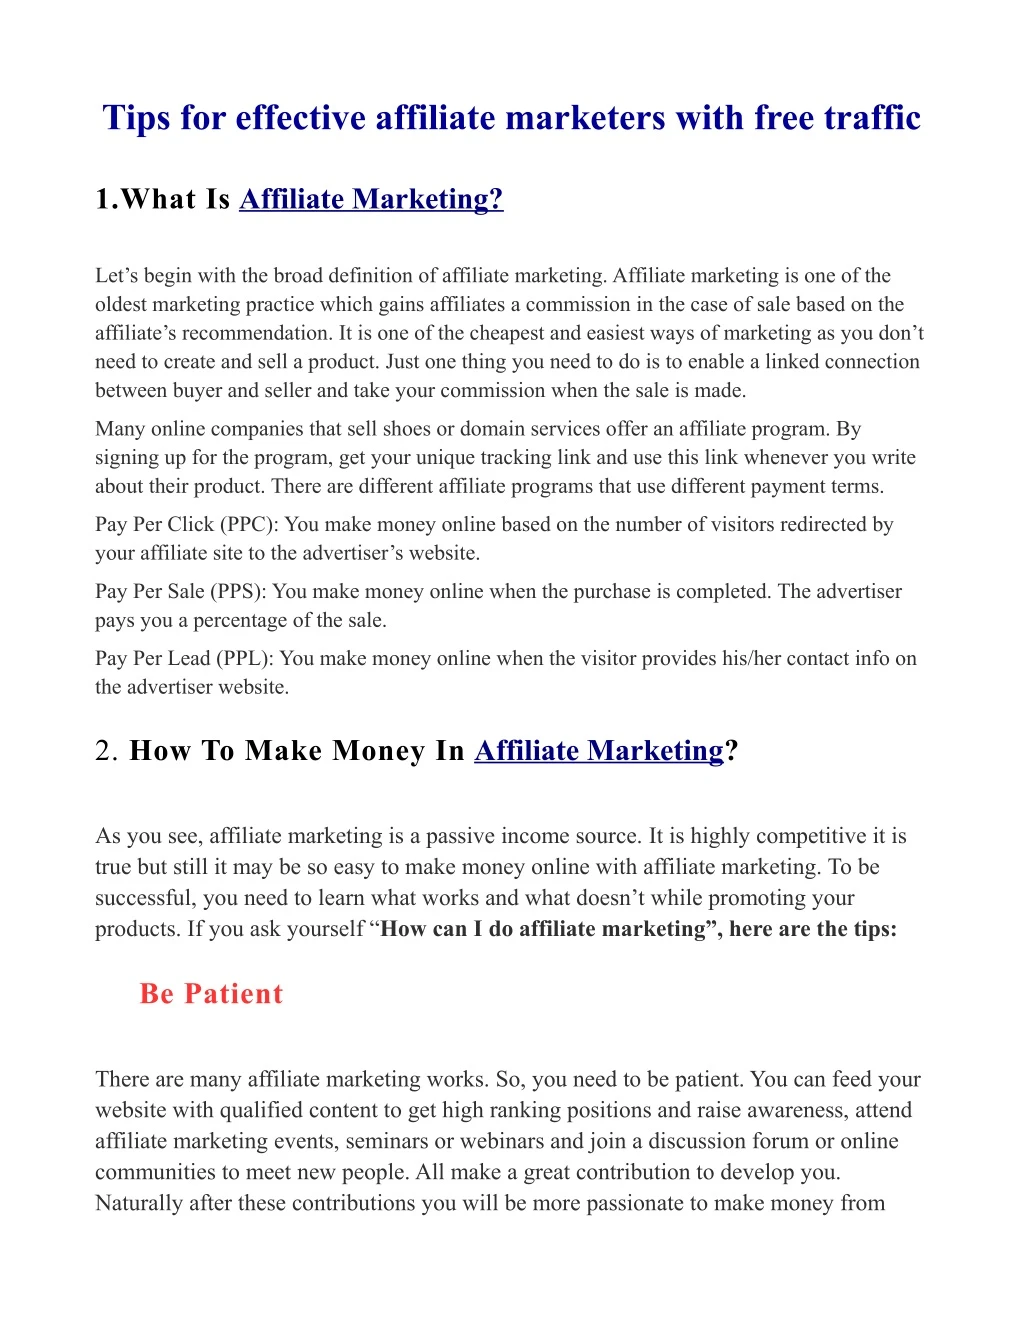 tips for effective affiliate marketers with free